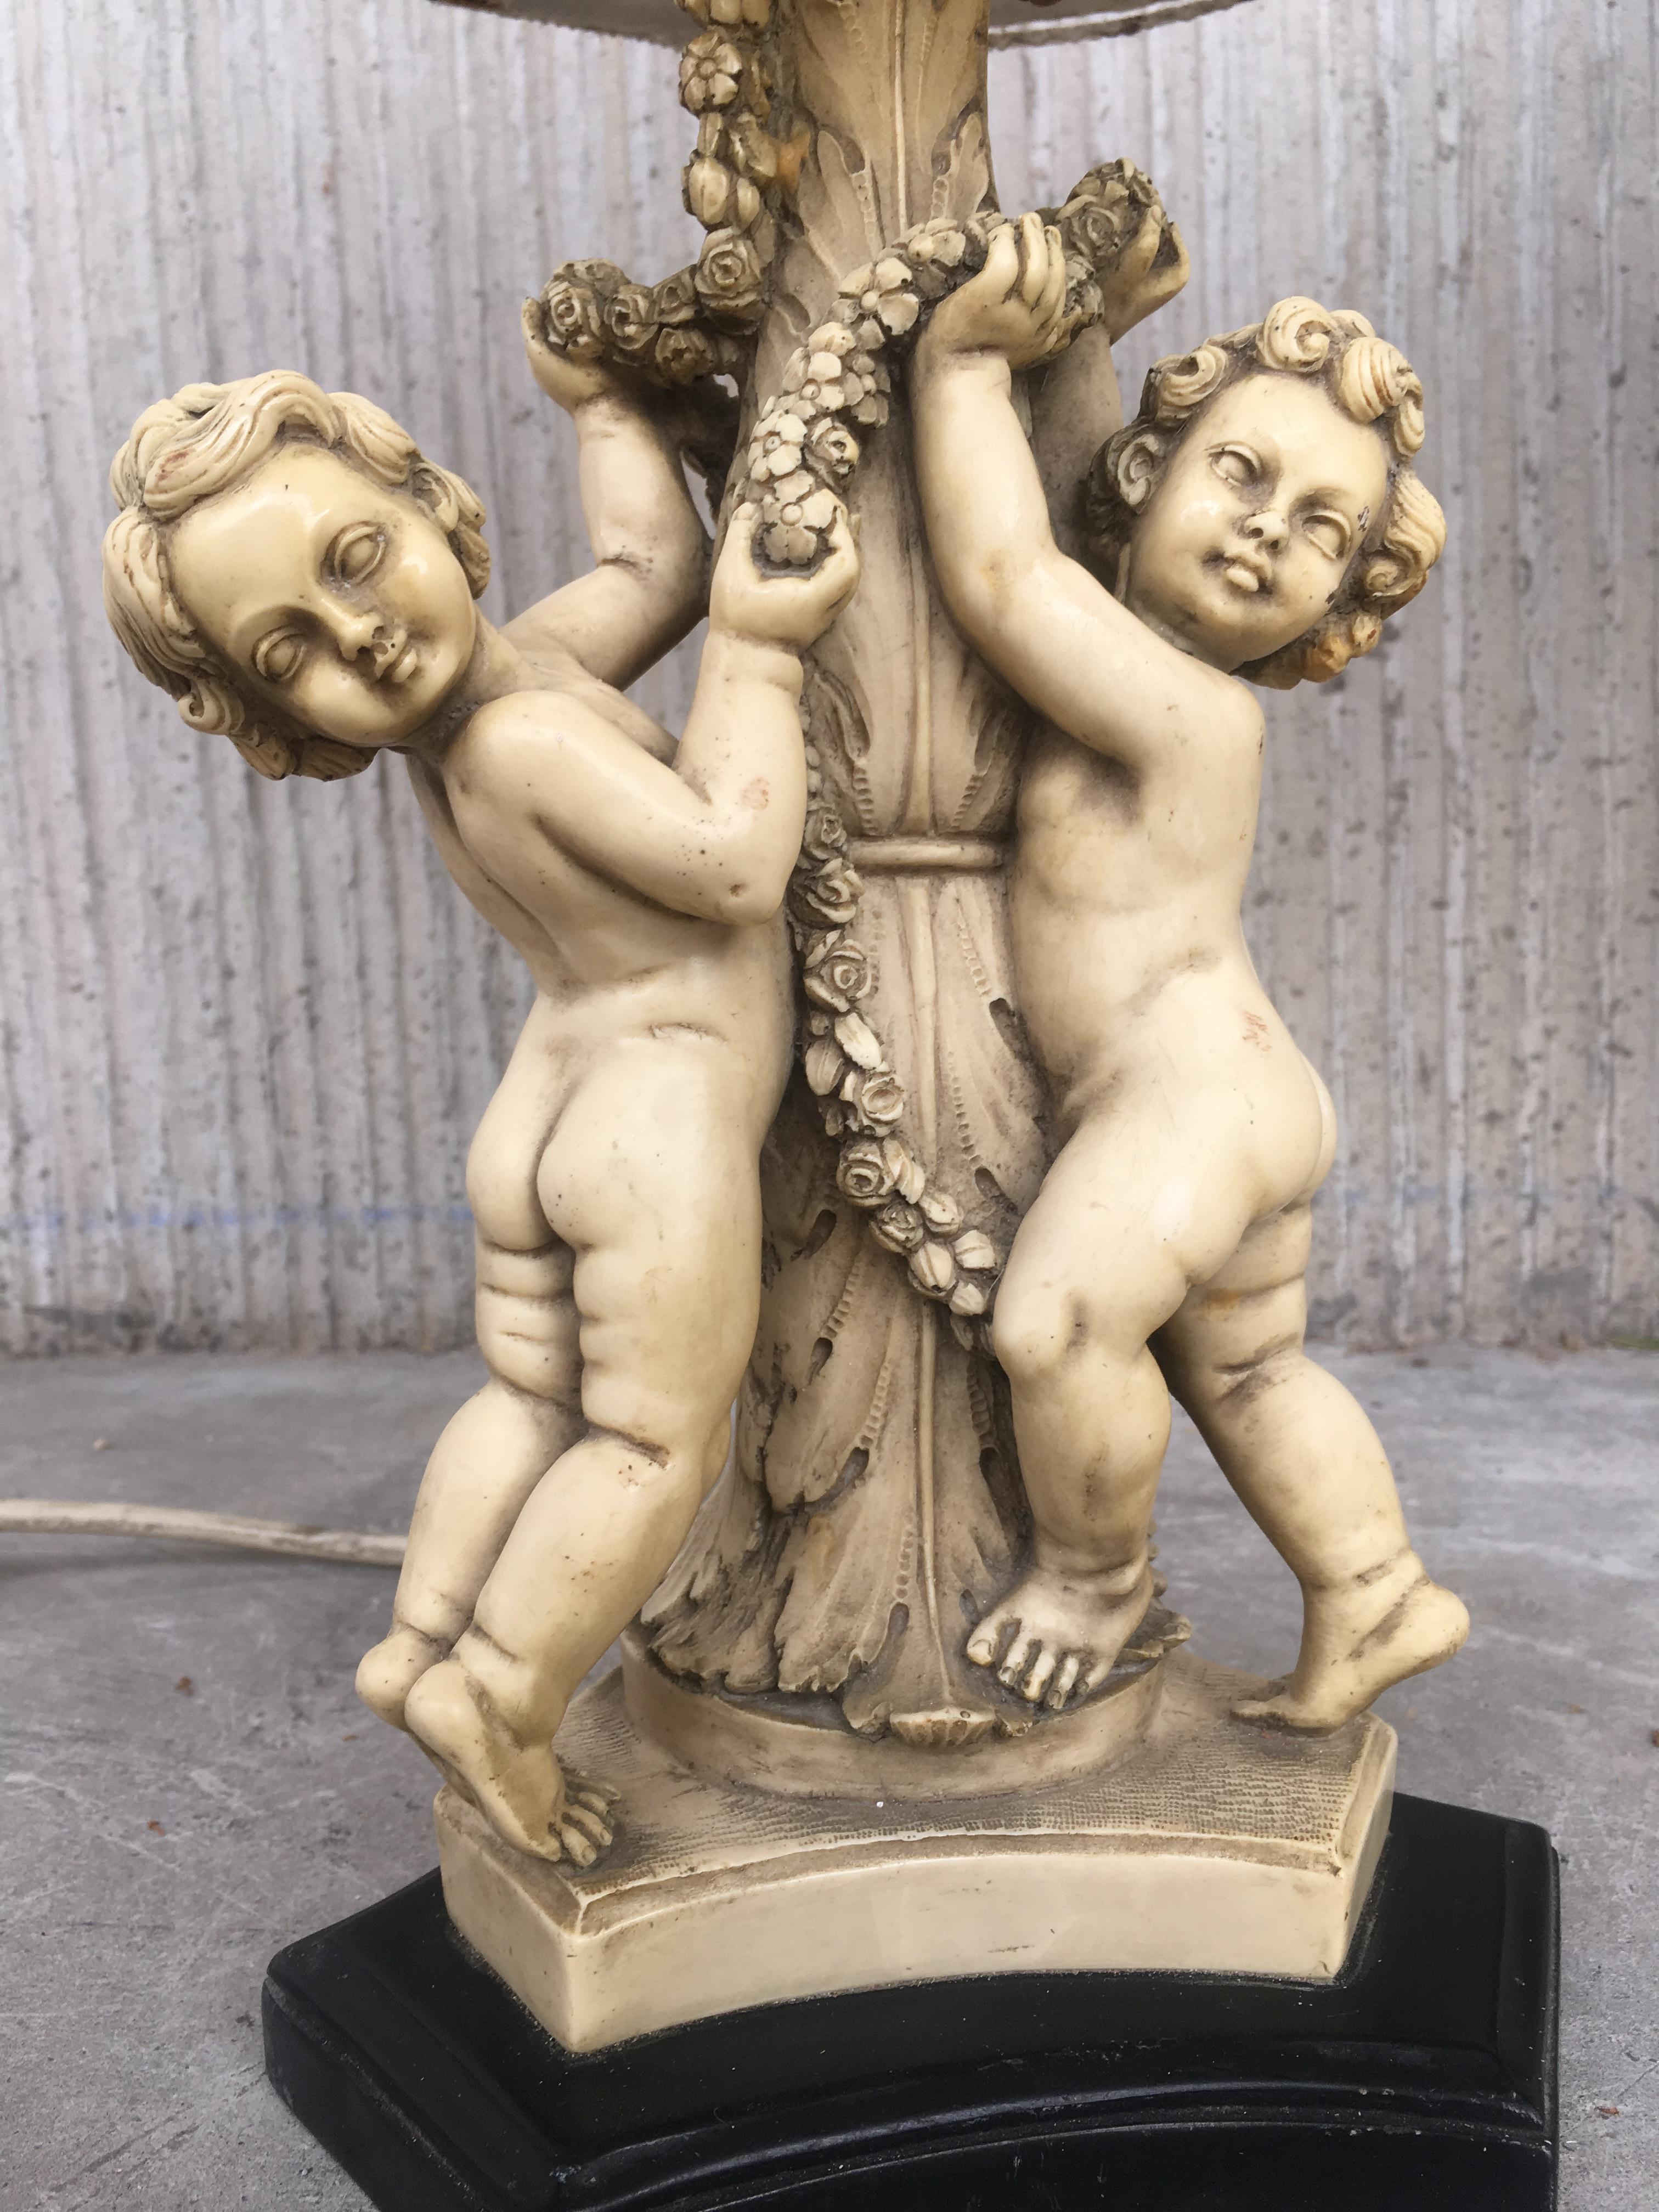 20th Century Pair of White Resin Cherub Lamps on Wooden Bases by G. Ruggeri 1